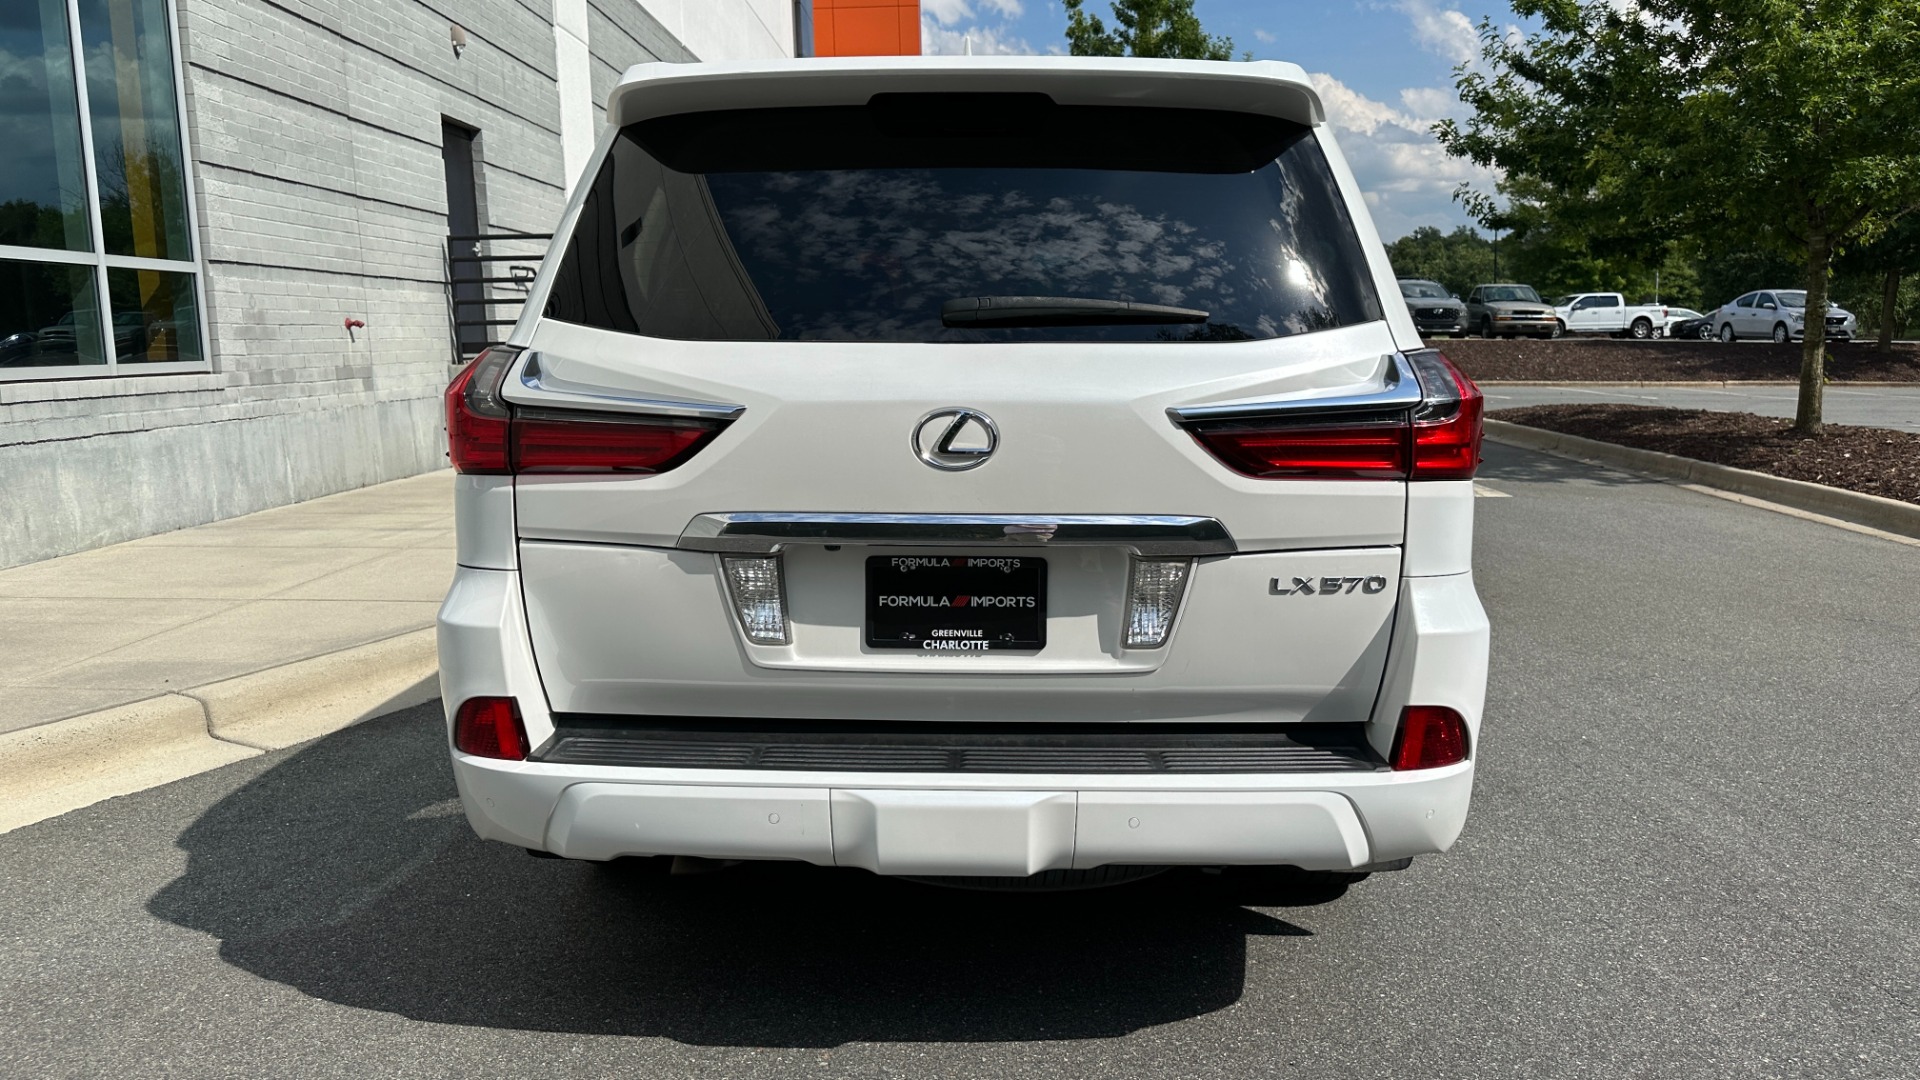 Used 2017 Lexus LX LX 570 LUXURY / MARK LEVINSON / REAR DVD SCREENS / 3 ROW / 4WD for sale $46,995 at Formula Imports in Charlotte NC 28227 9